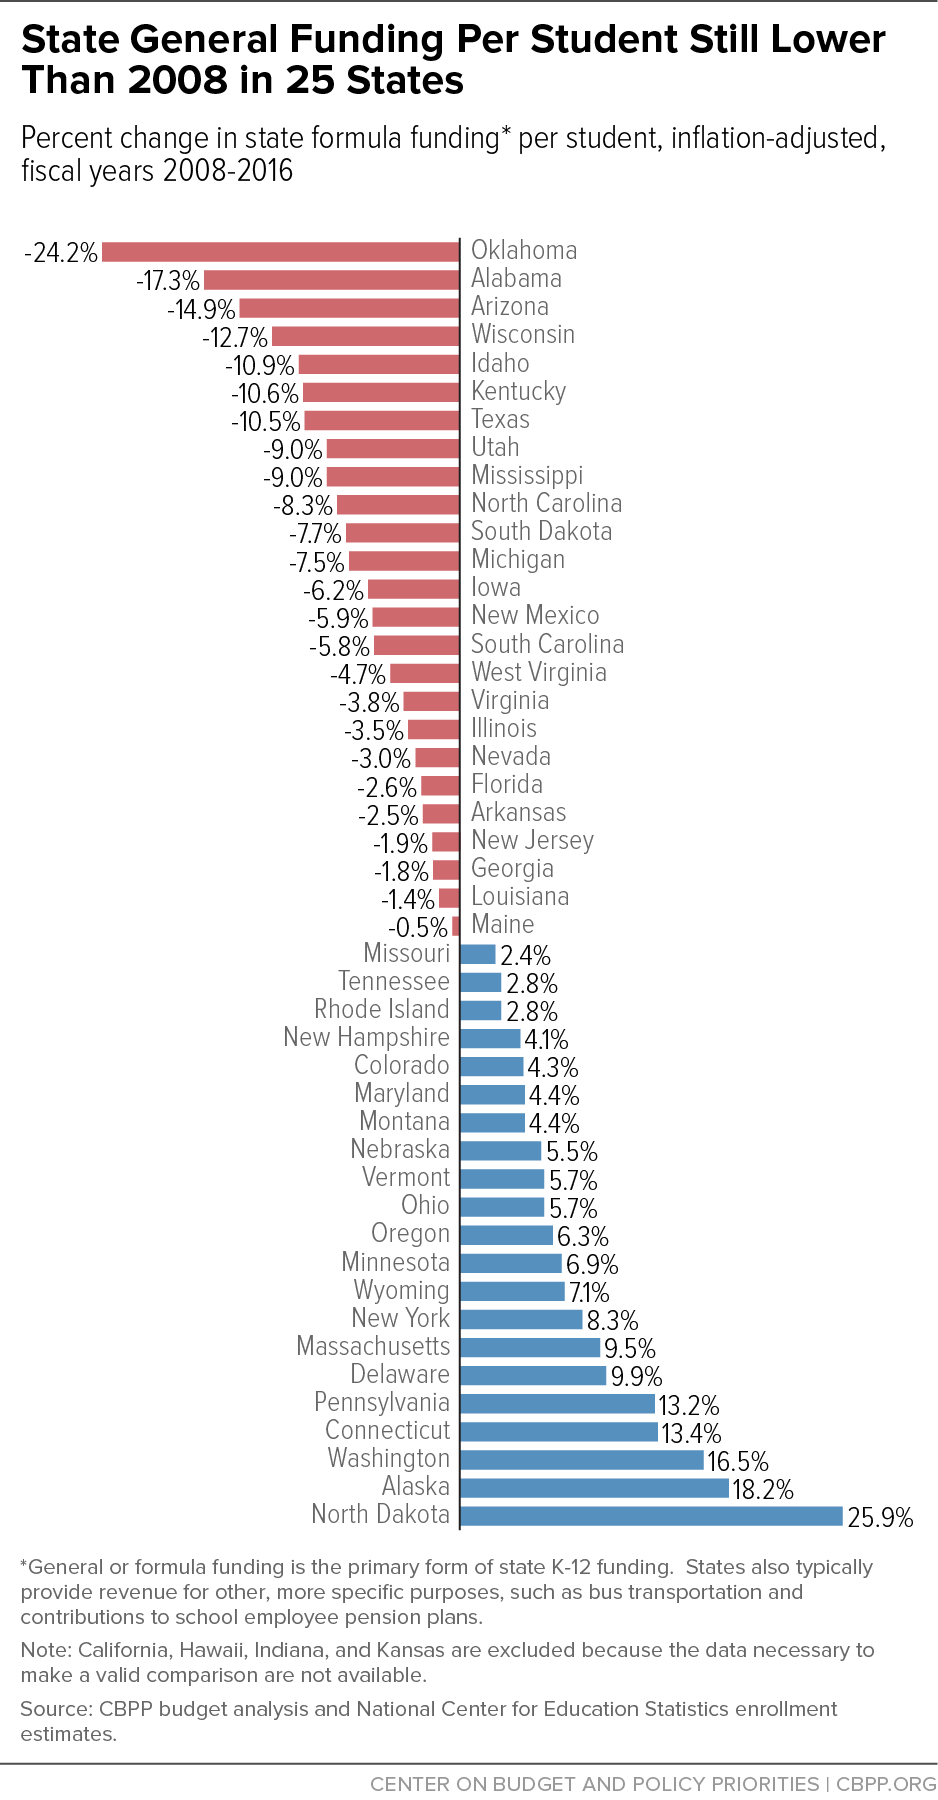 State General Funding Per Student Still Lower Than 2008 in 25 States